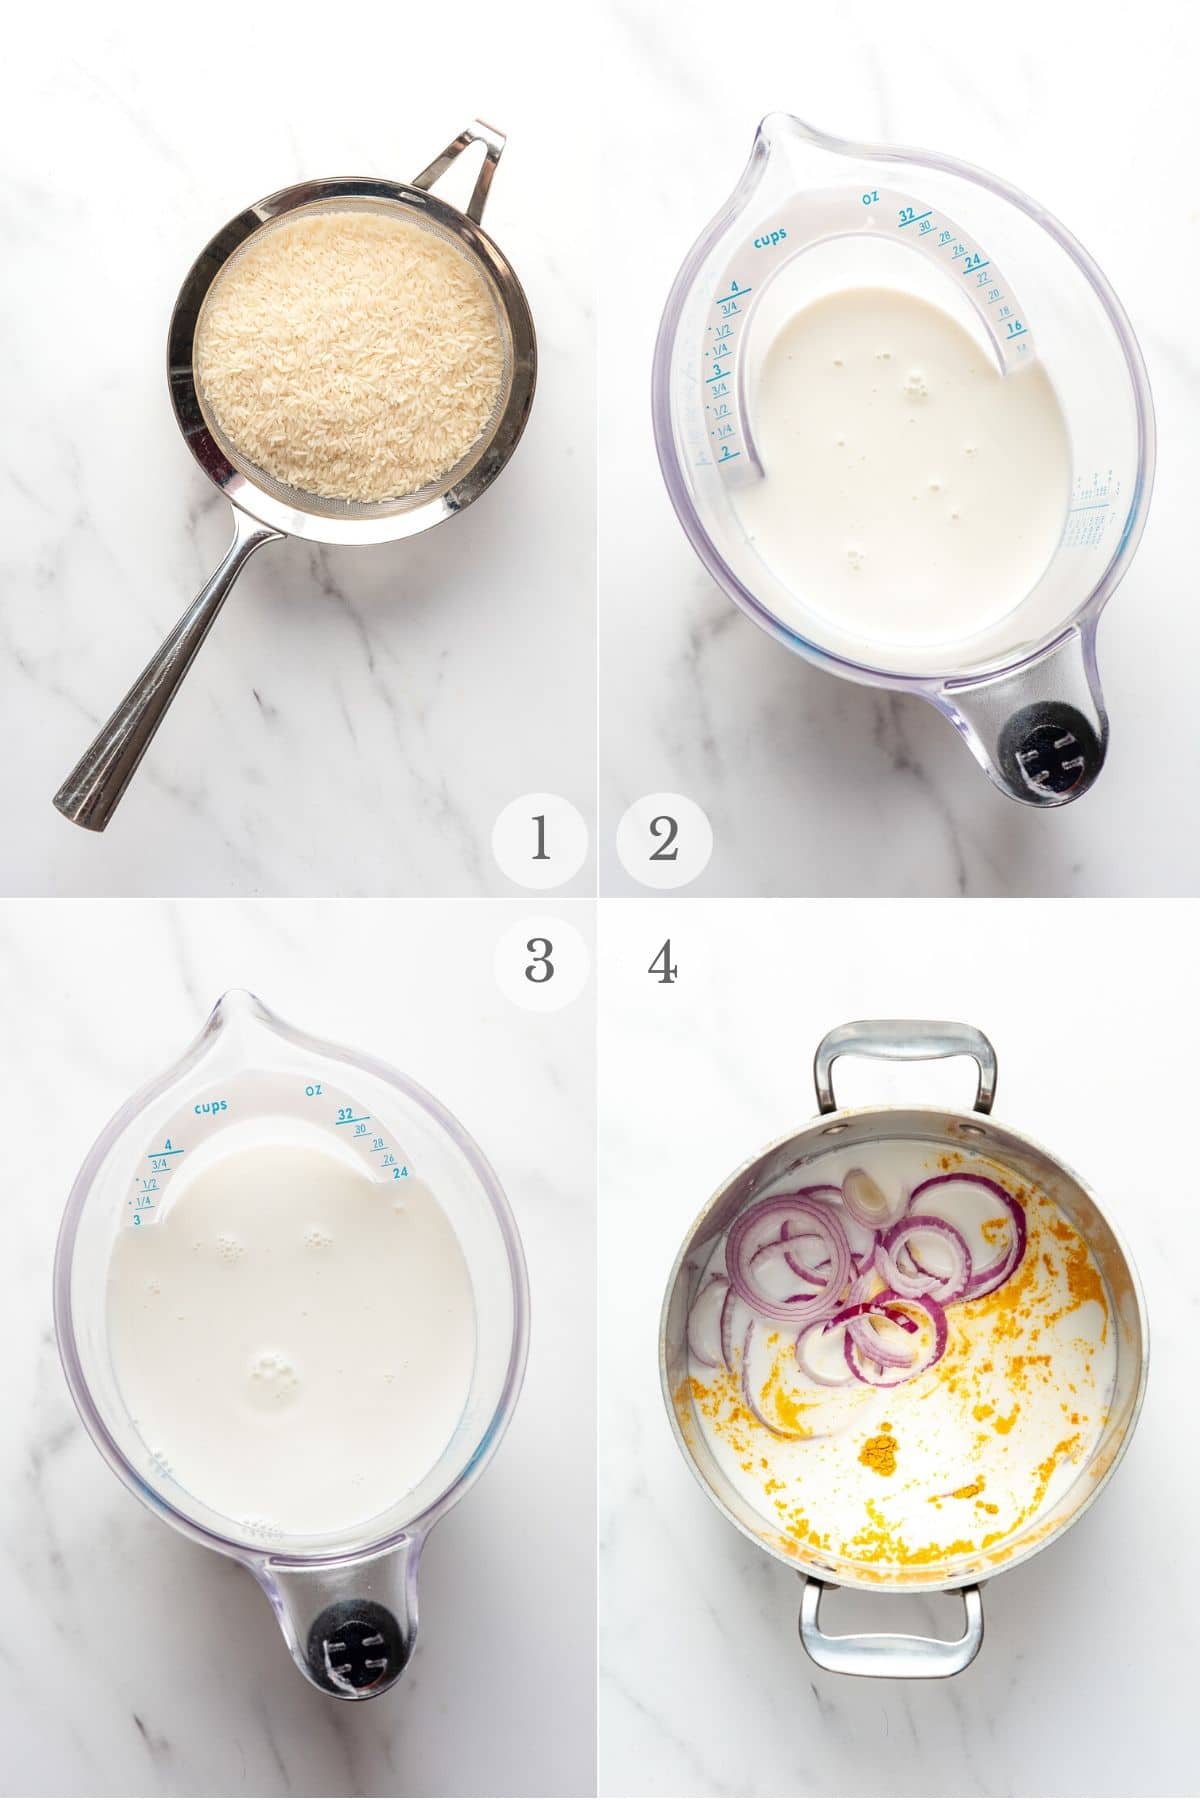 how to make coconut rice recipe steps 1-4 (photo collage)